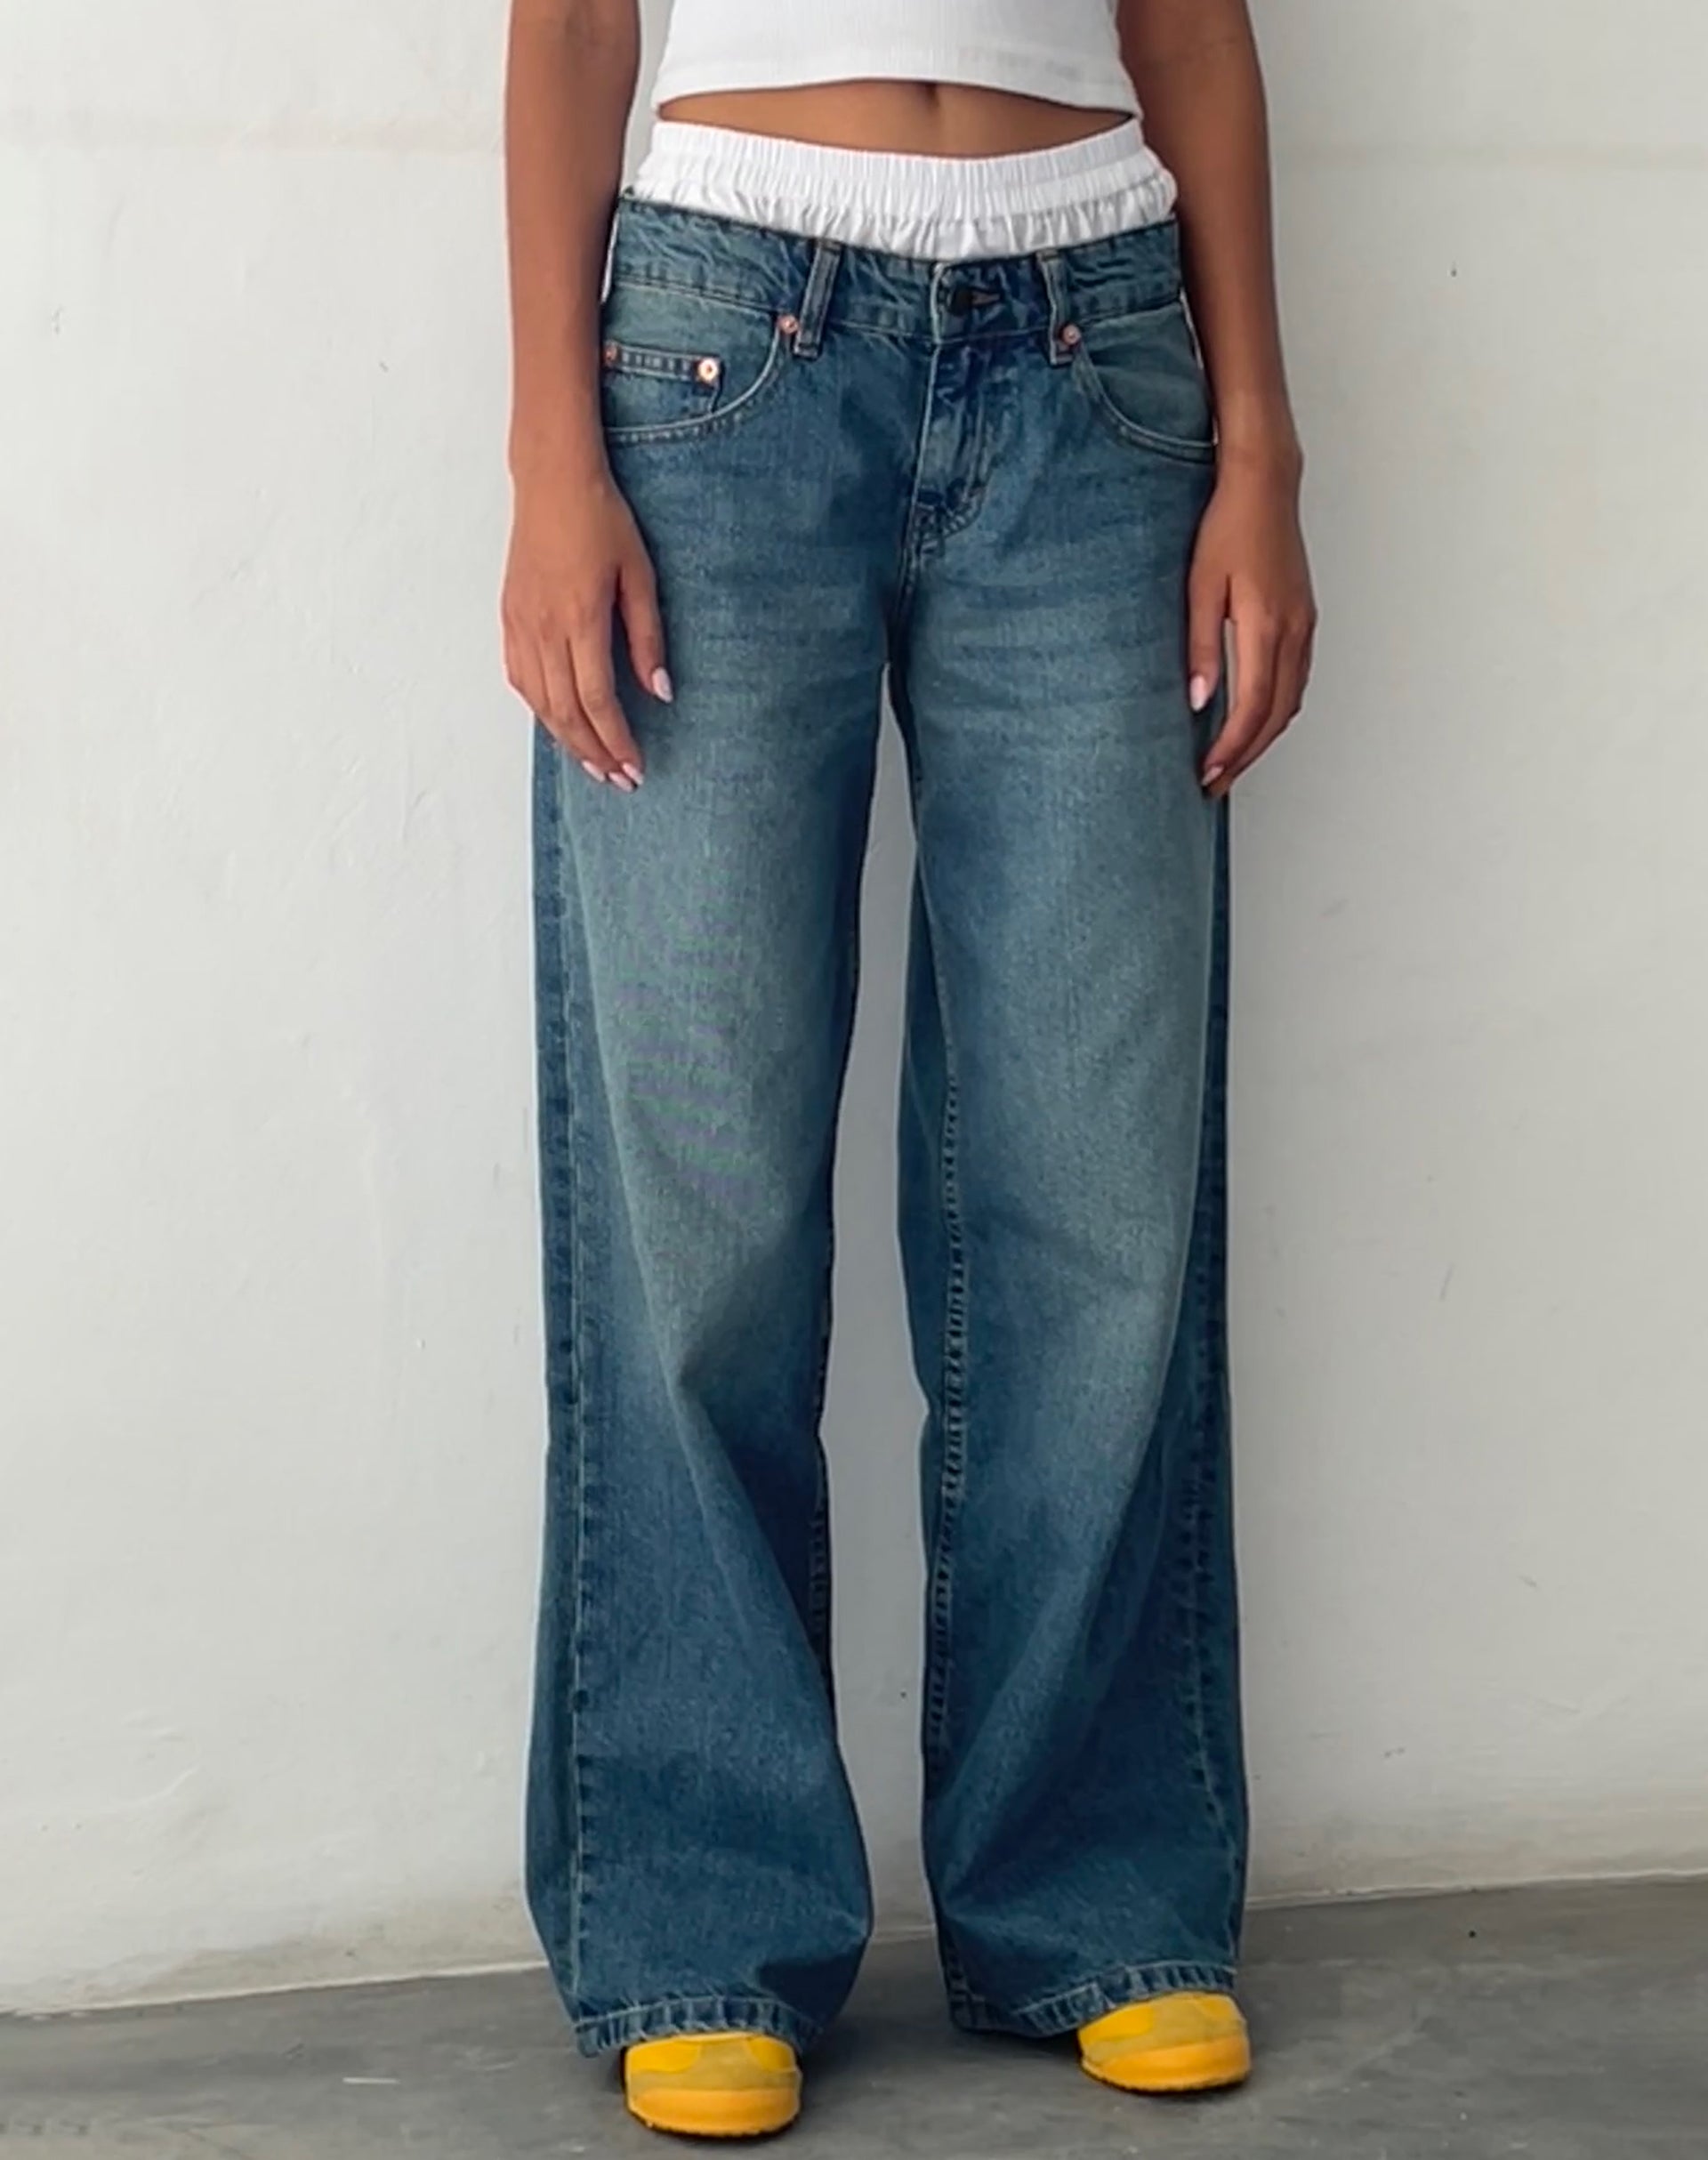 Vintage Lowrise Jeans Women's 26in Blue Flare Grunge Requested